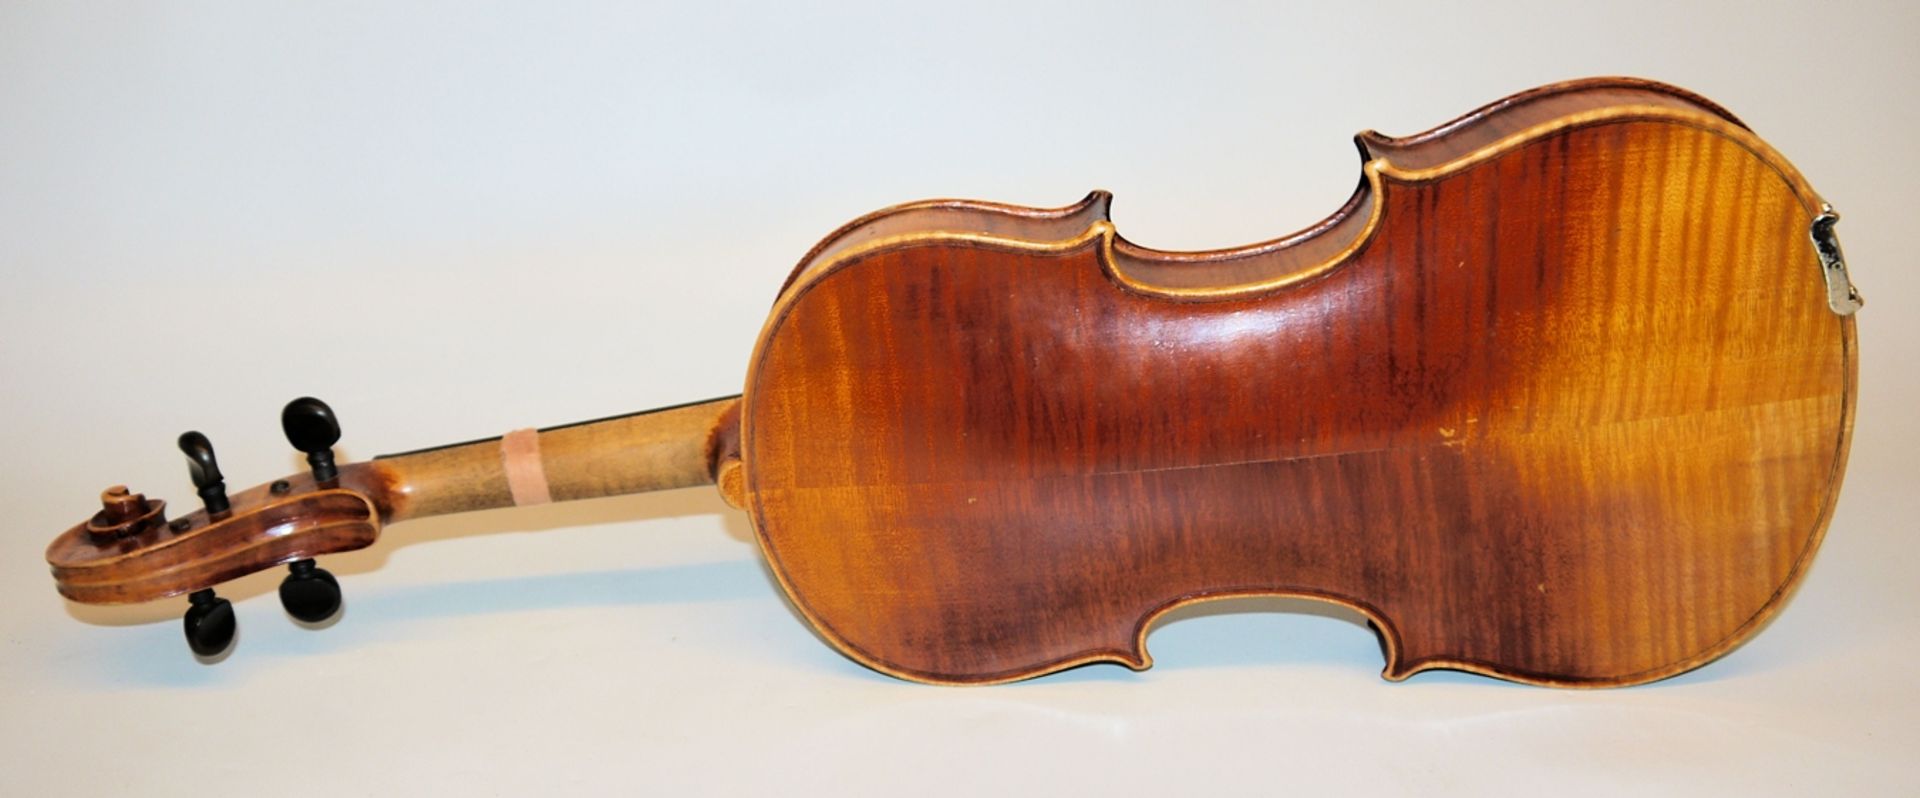 Playable violin, probably Mittenwald, 1st half 20th century - Image 3 of 5